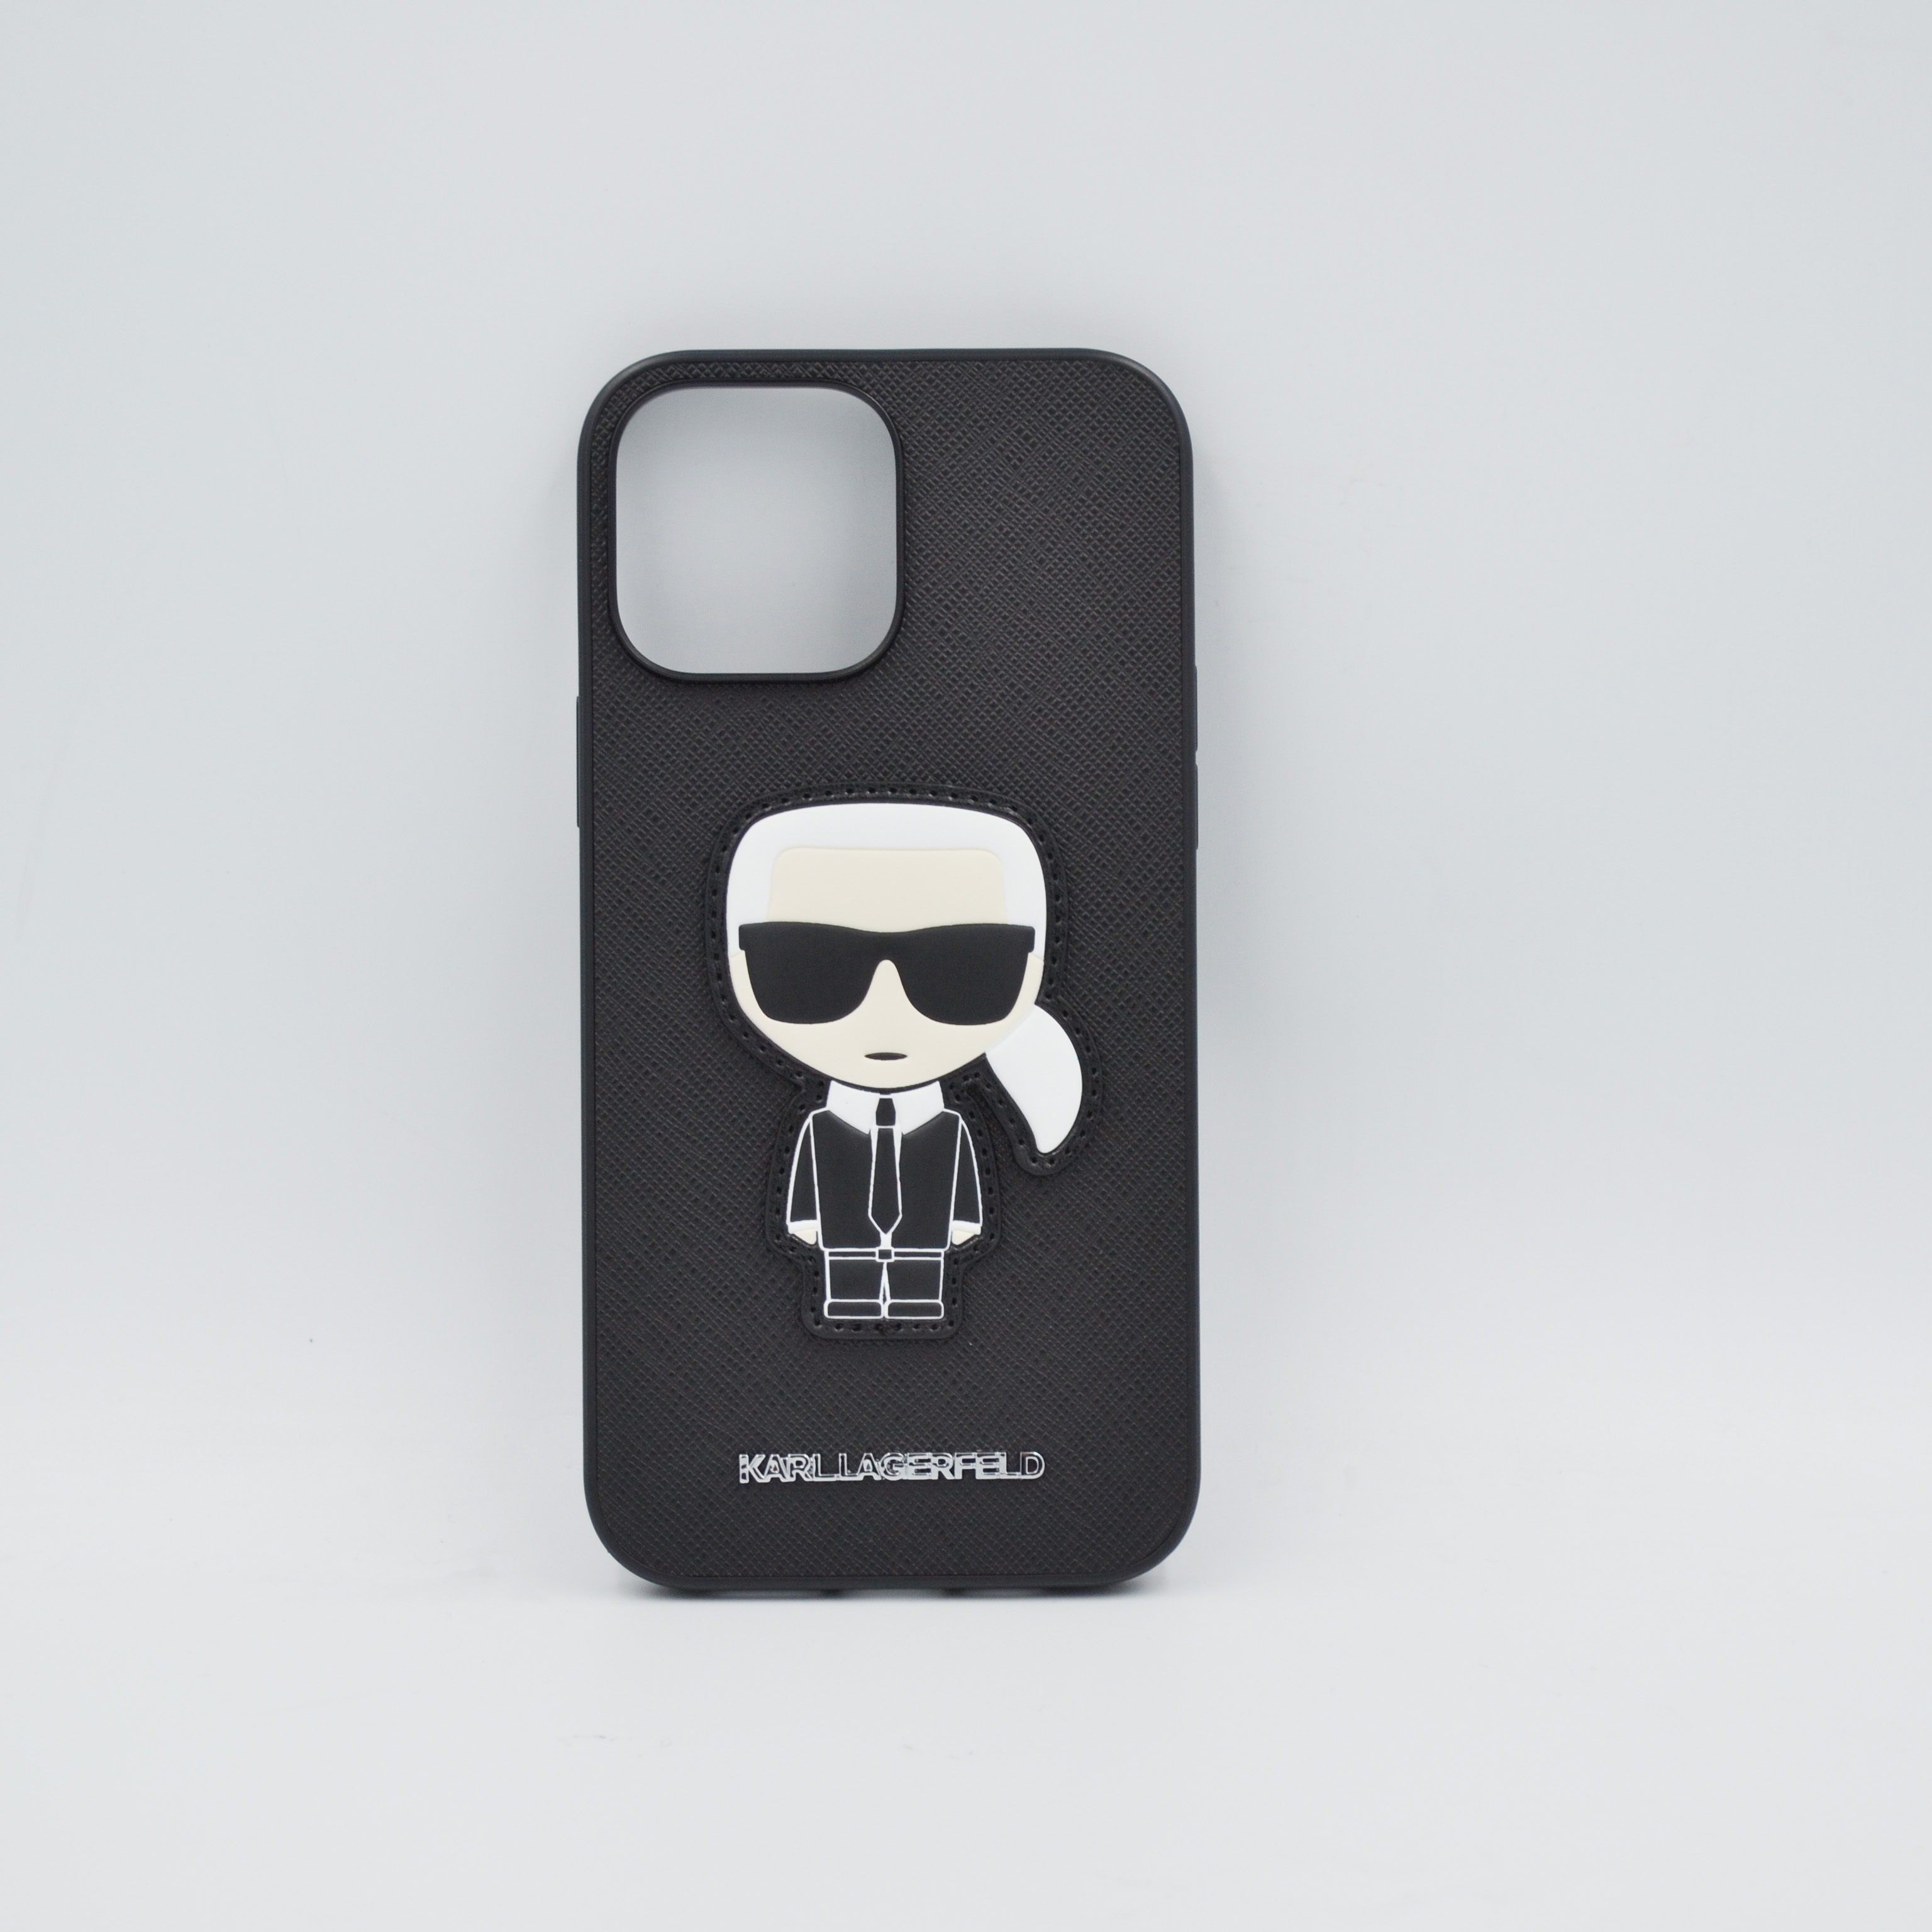 Cover CG mobile Karl Lagerfeld pouch Pu Saffiano Karl Ikonic (medium),  color black - AliExpress